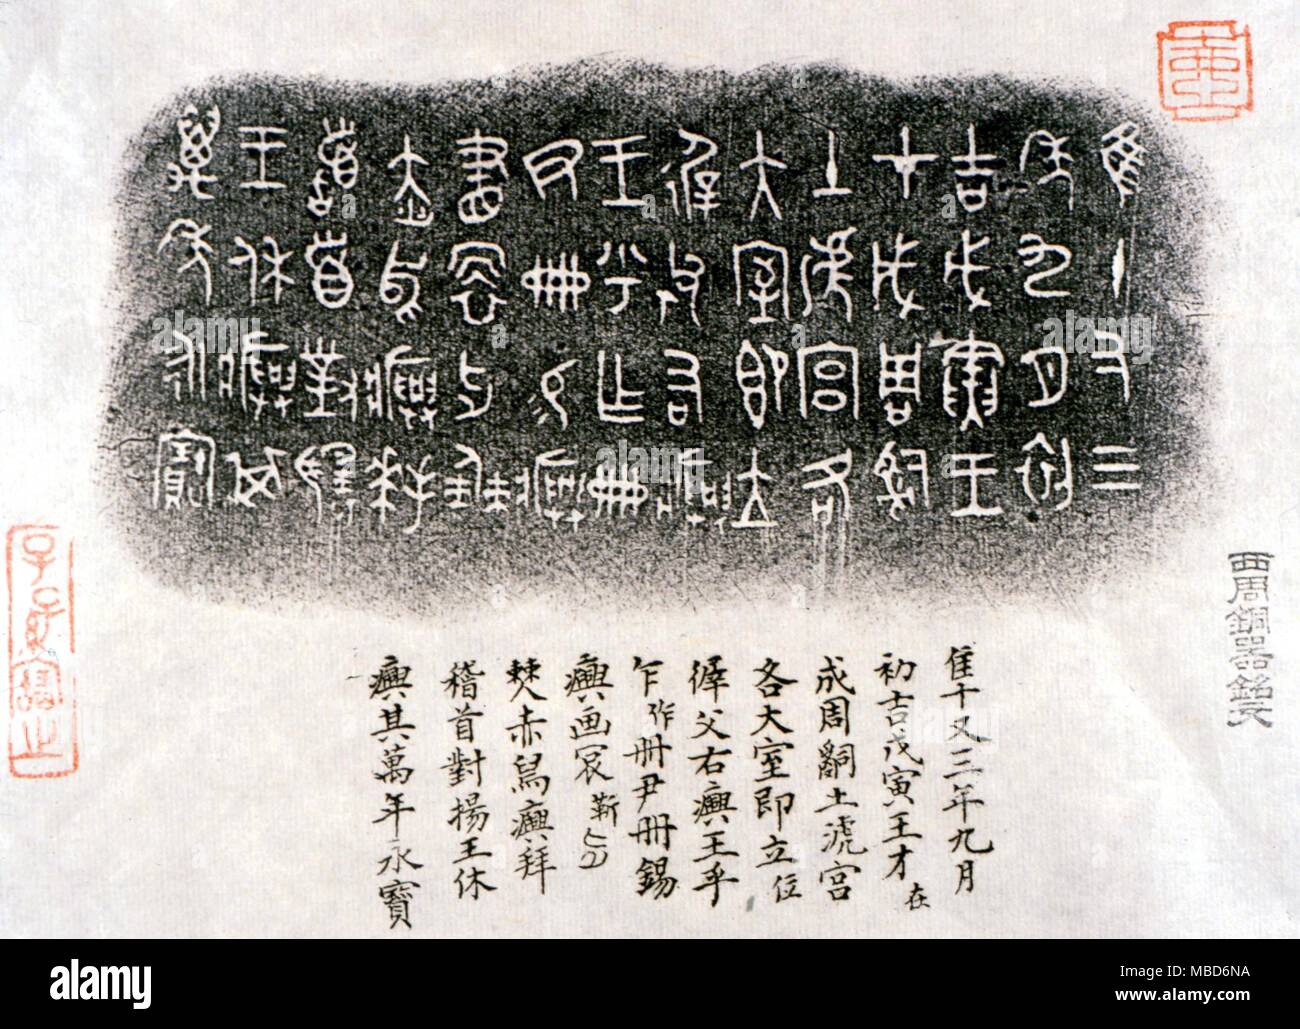 ALPHABETS - EARLY CHINESE - Pictographs cut on the inside of ritual bowls, and here printed by frottage. These pictographs gradually gave rise to the calligraphic written characters. Probably of the Han period. Stock Photo